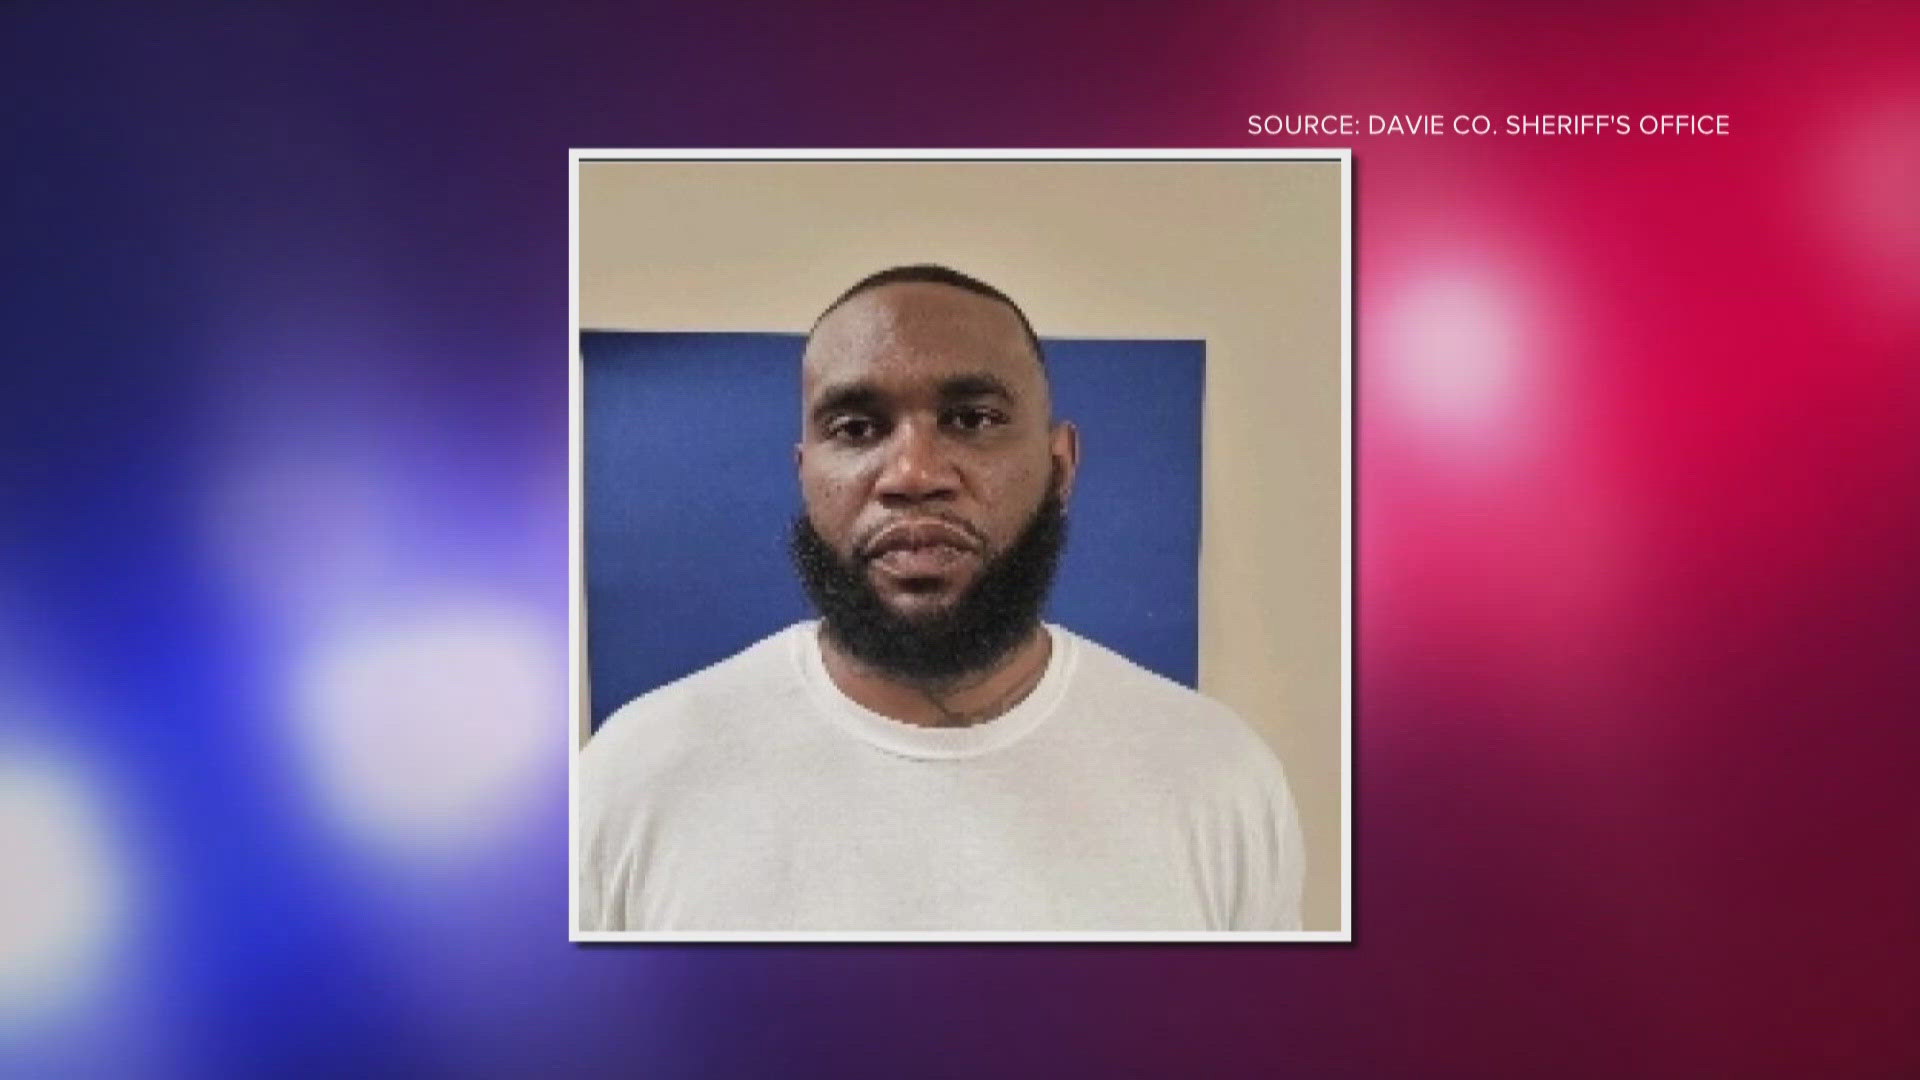 Dennis Jerome Sales was returned to NC last Thursday after being arrested in Tennessee following a shooting in Davie Co.